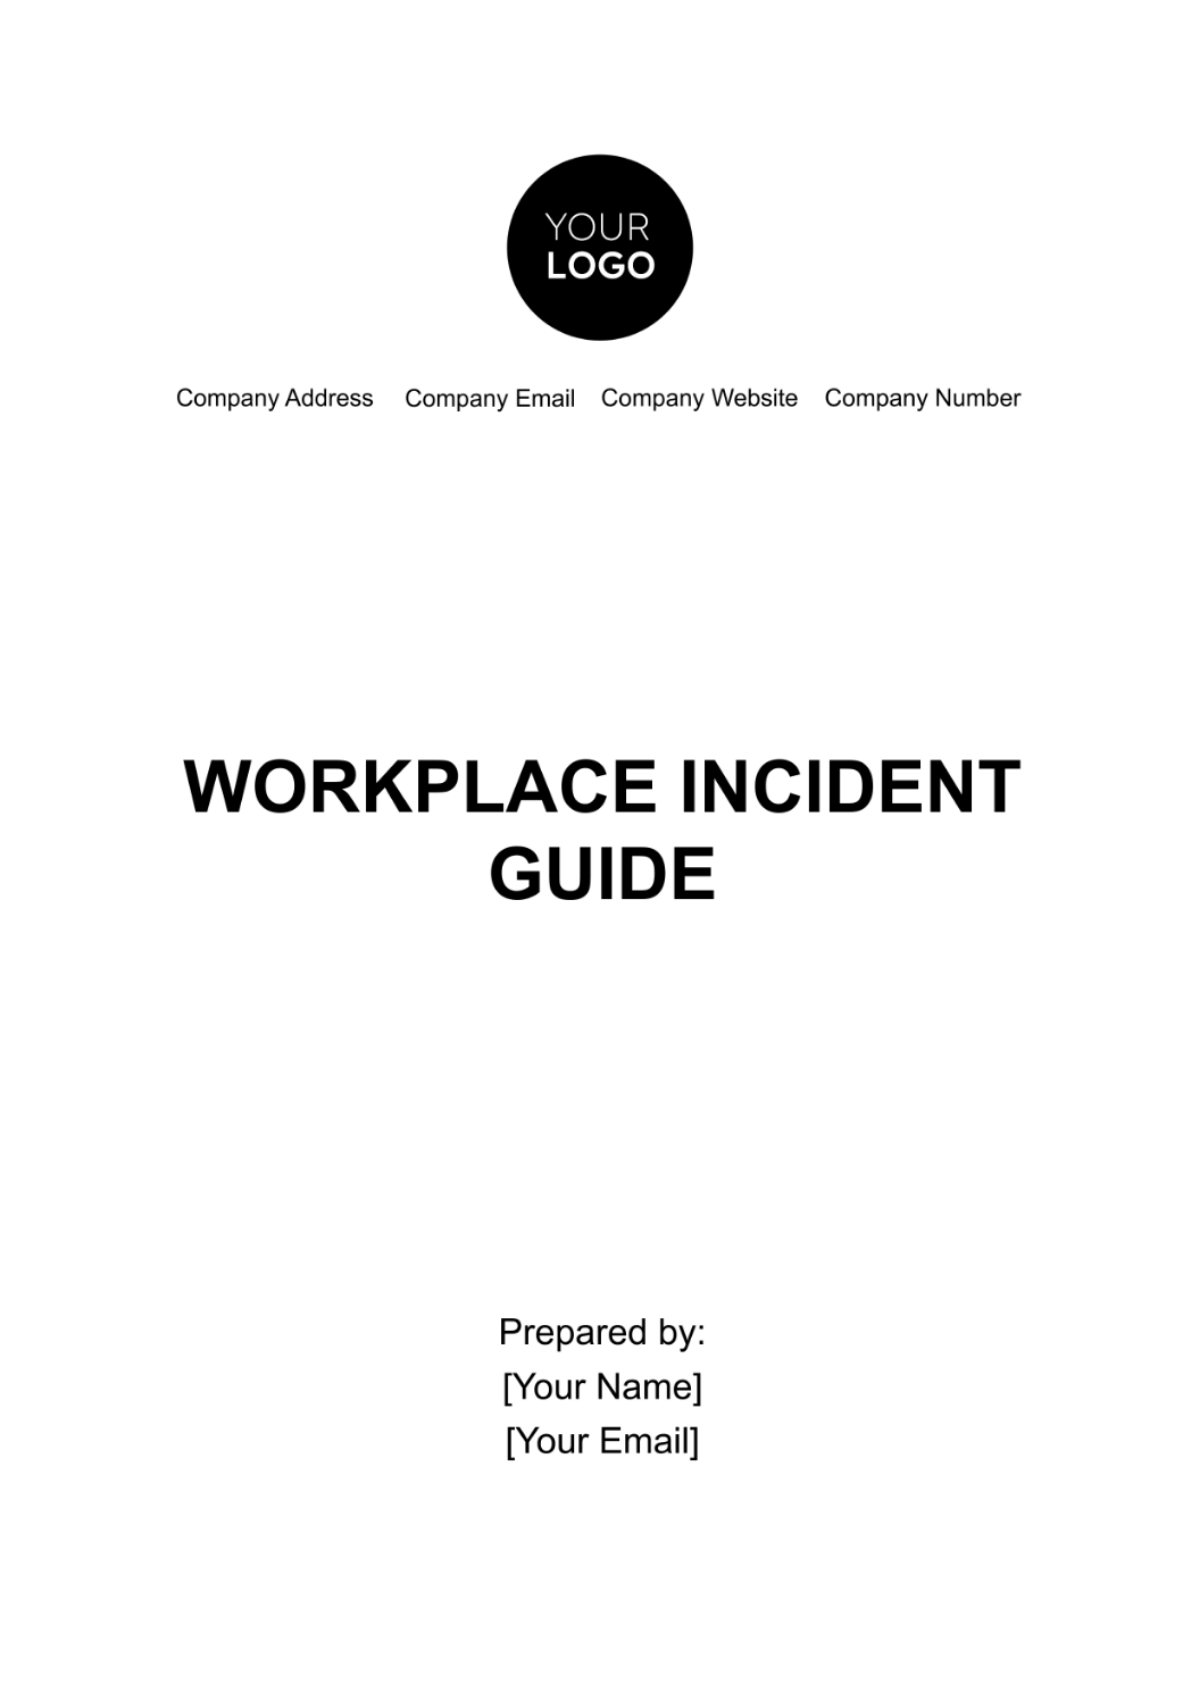 Workplace Incident Guide Template